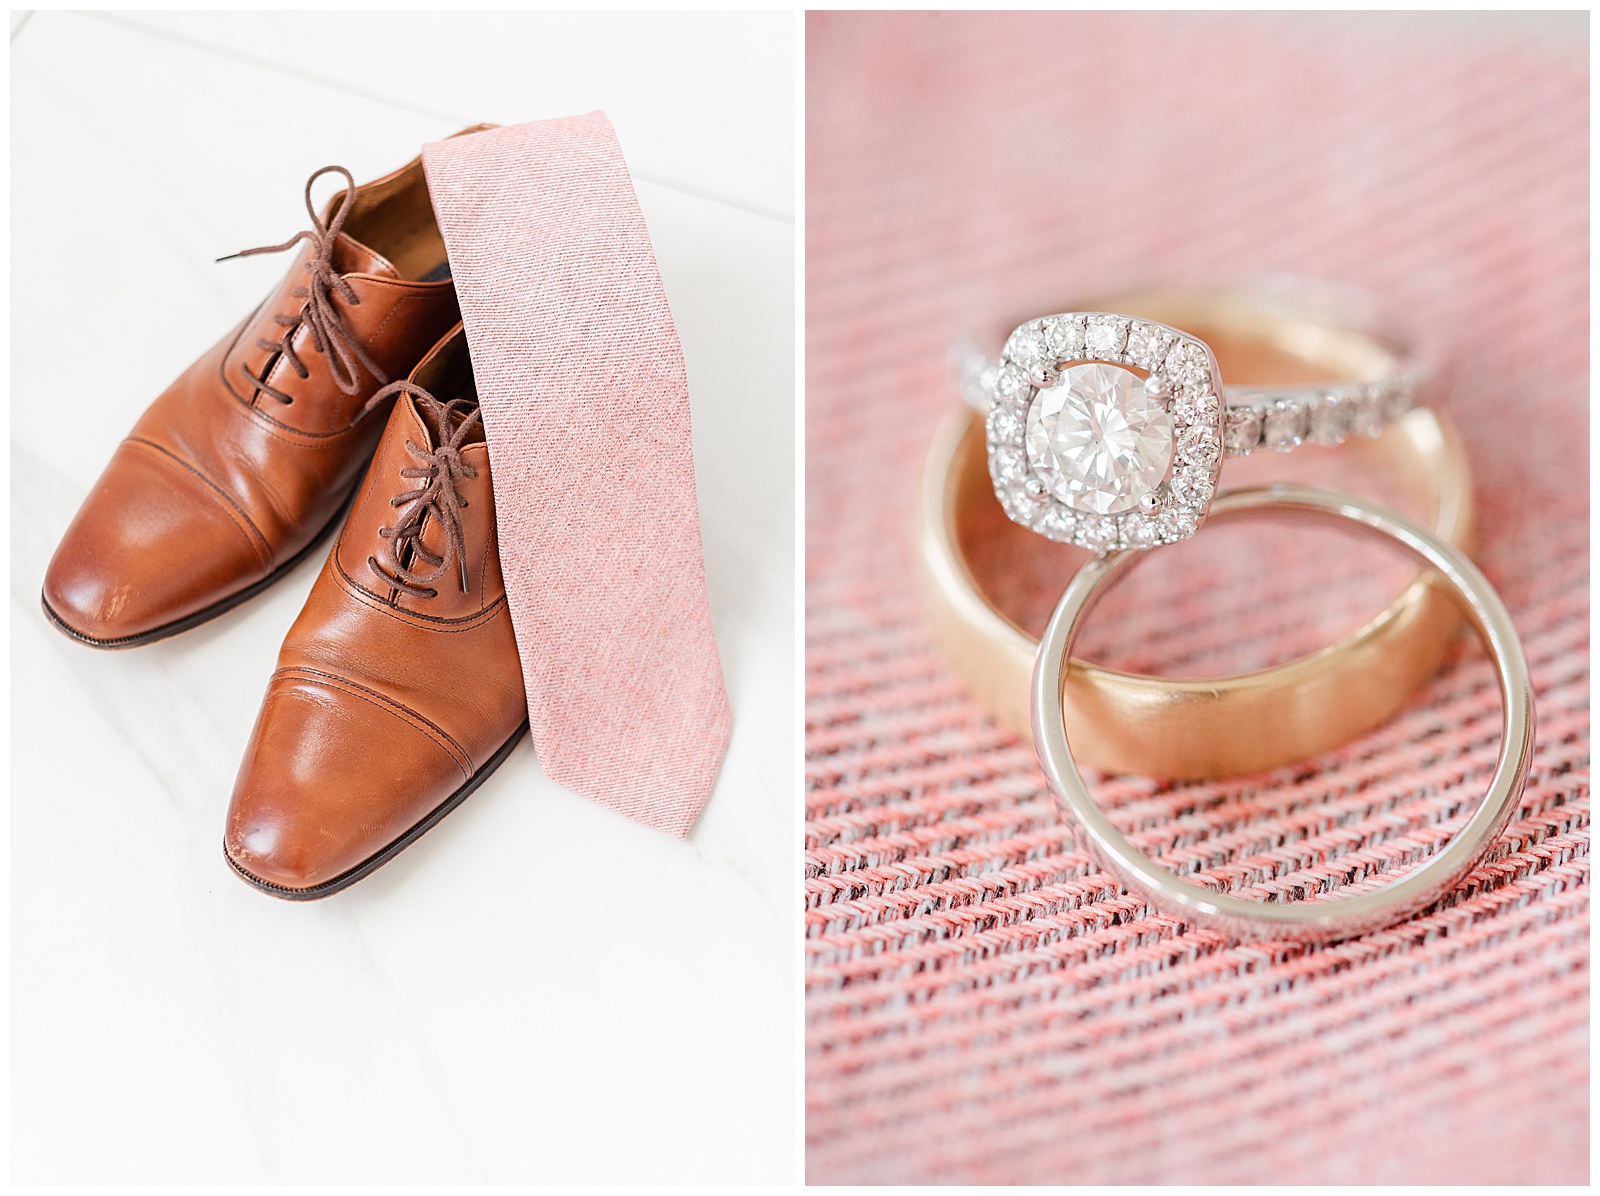 Groom's Brown Shoes and Wedding Ring Detail Shot from Light and Airy Outdoor Wedding at Separk Mansion in Gastonia, NC | Kevyn Dixon Photography